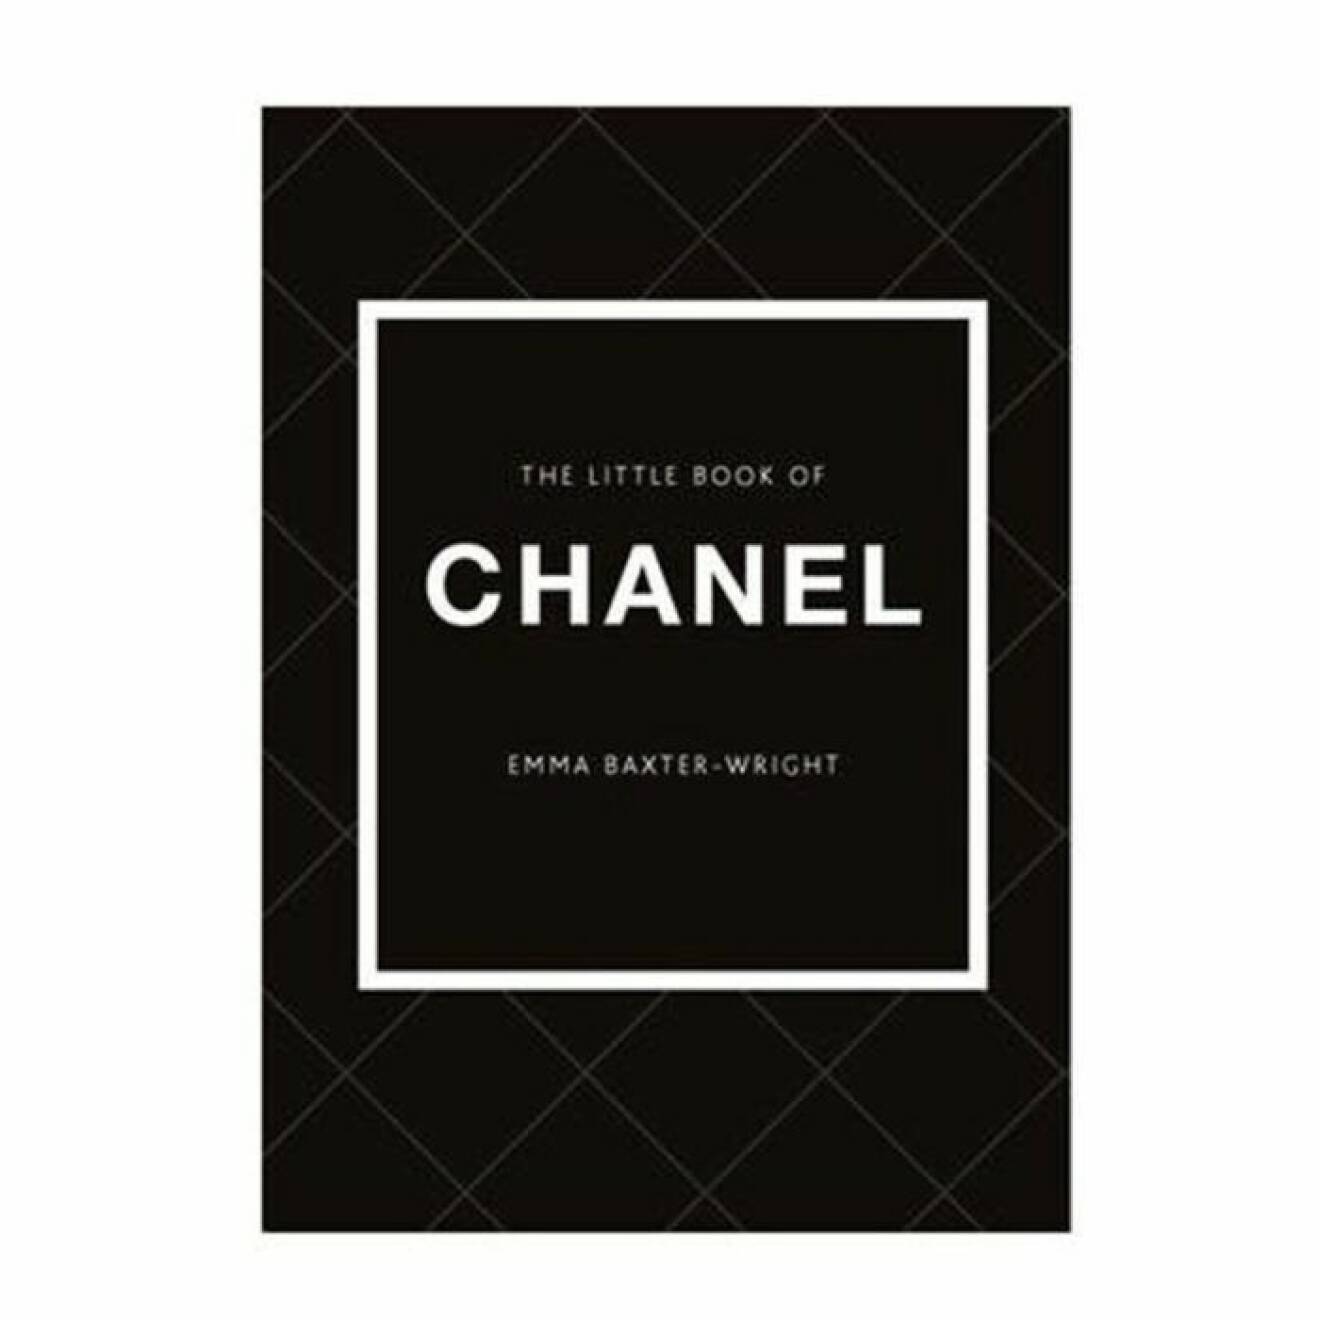 The little book of Chanel coffee table